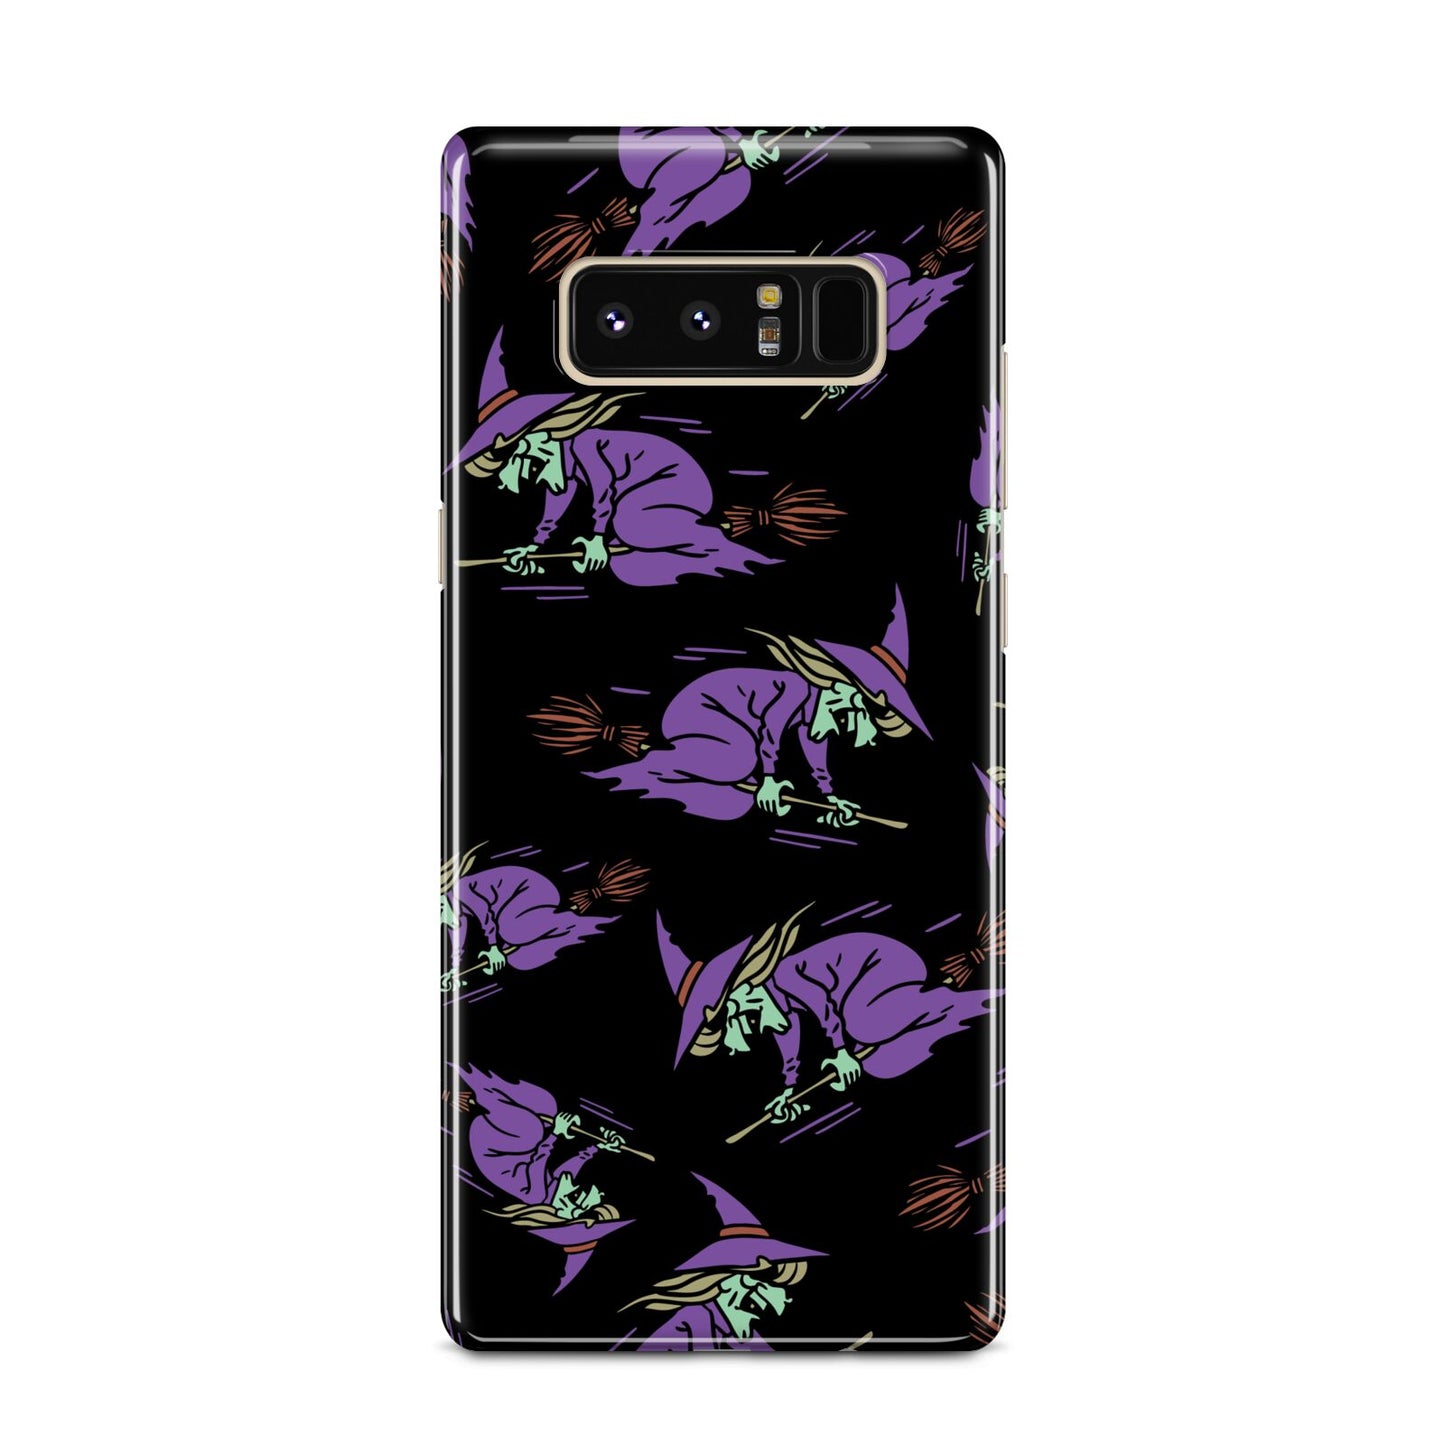 Flying Witches Samsung Galaxy Note 8 Case